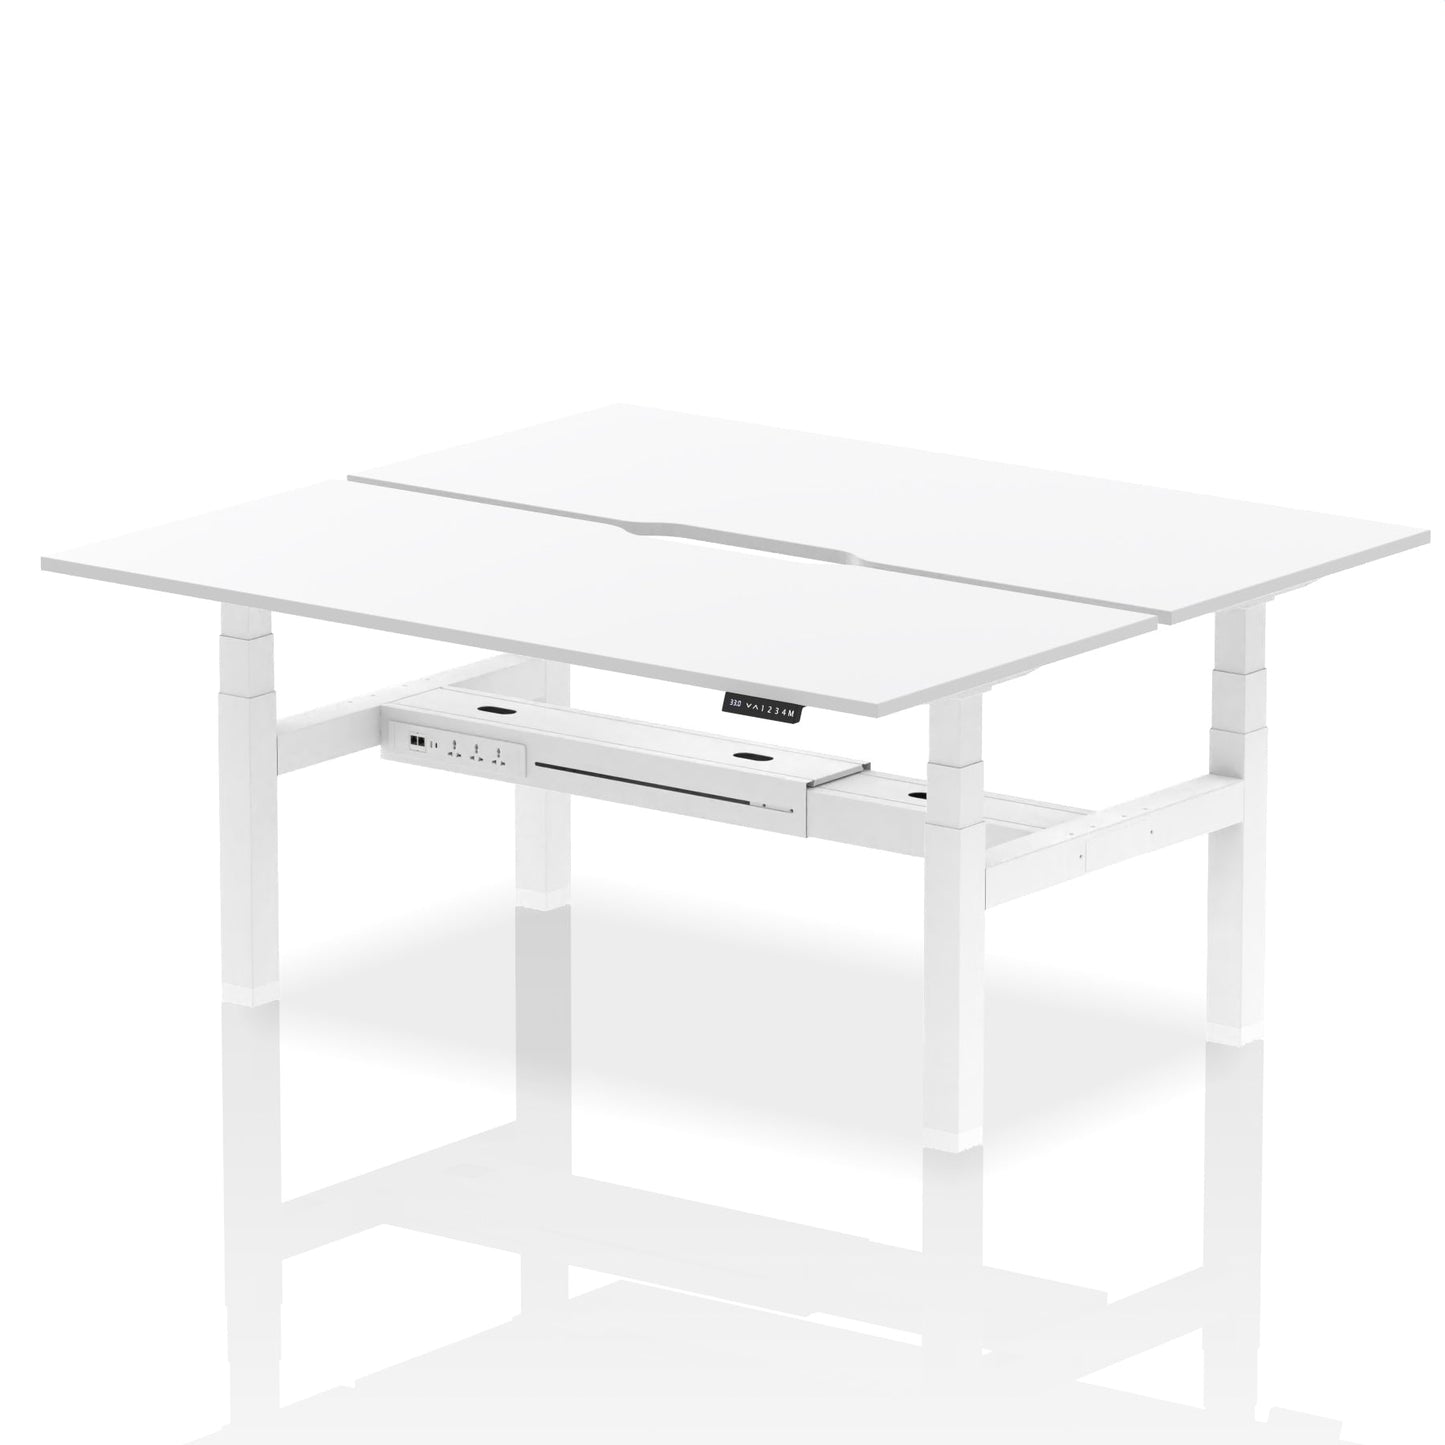 Air Back-to-Back Scalloped Edge Height Adjustable Bench Desk - 2 Person